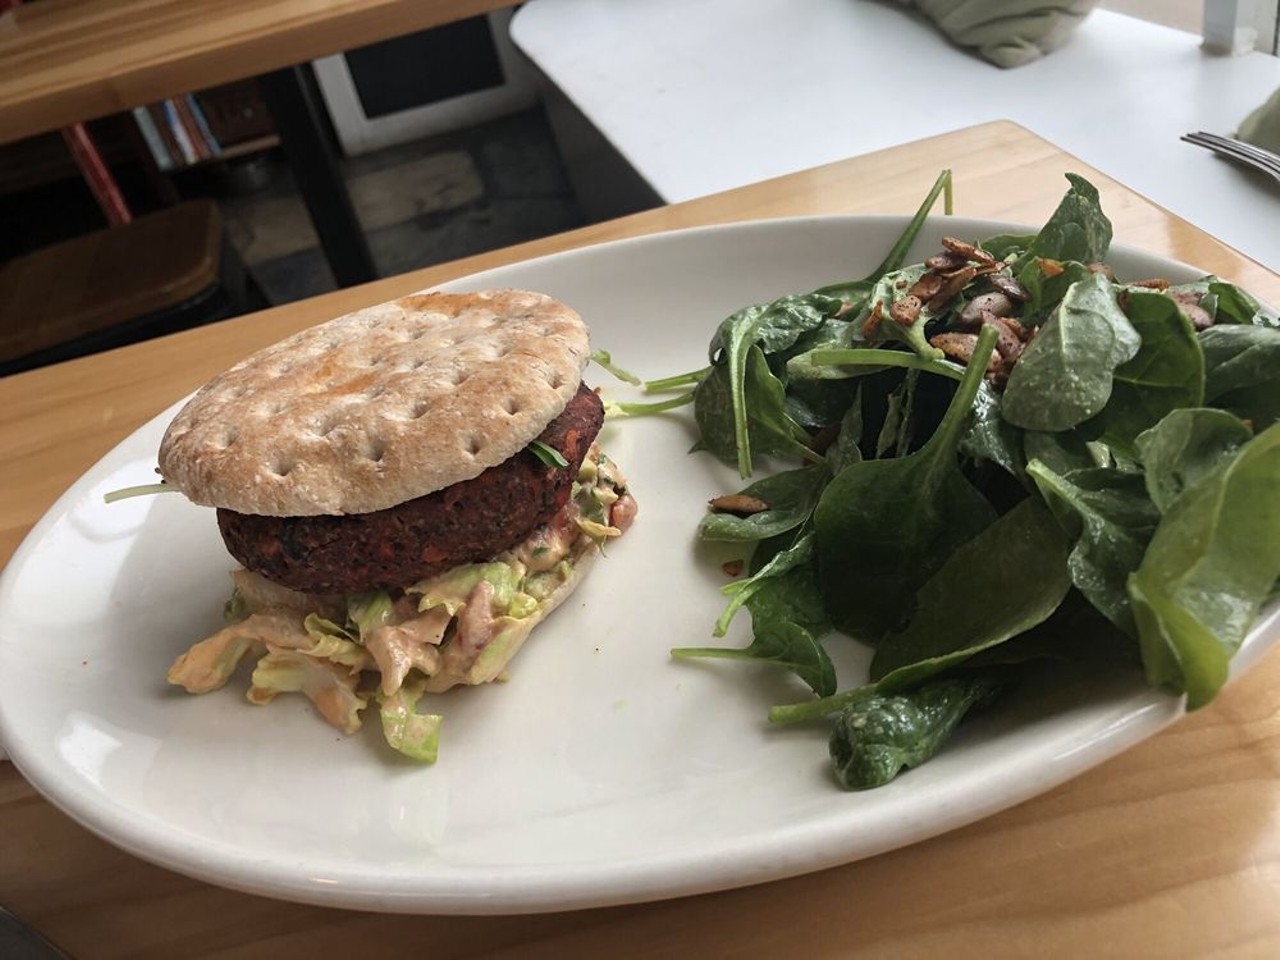 #8: Seedz Cafe
(6344 S Rosebury; 314-725-7333)
Seedz is rated four-and-a-half stars. Read more reviews here.
Photo credit: Jason P. via Yelp